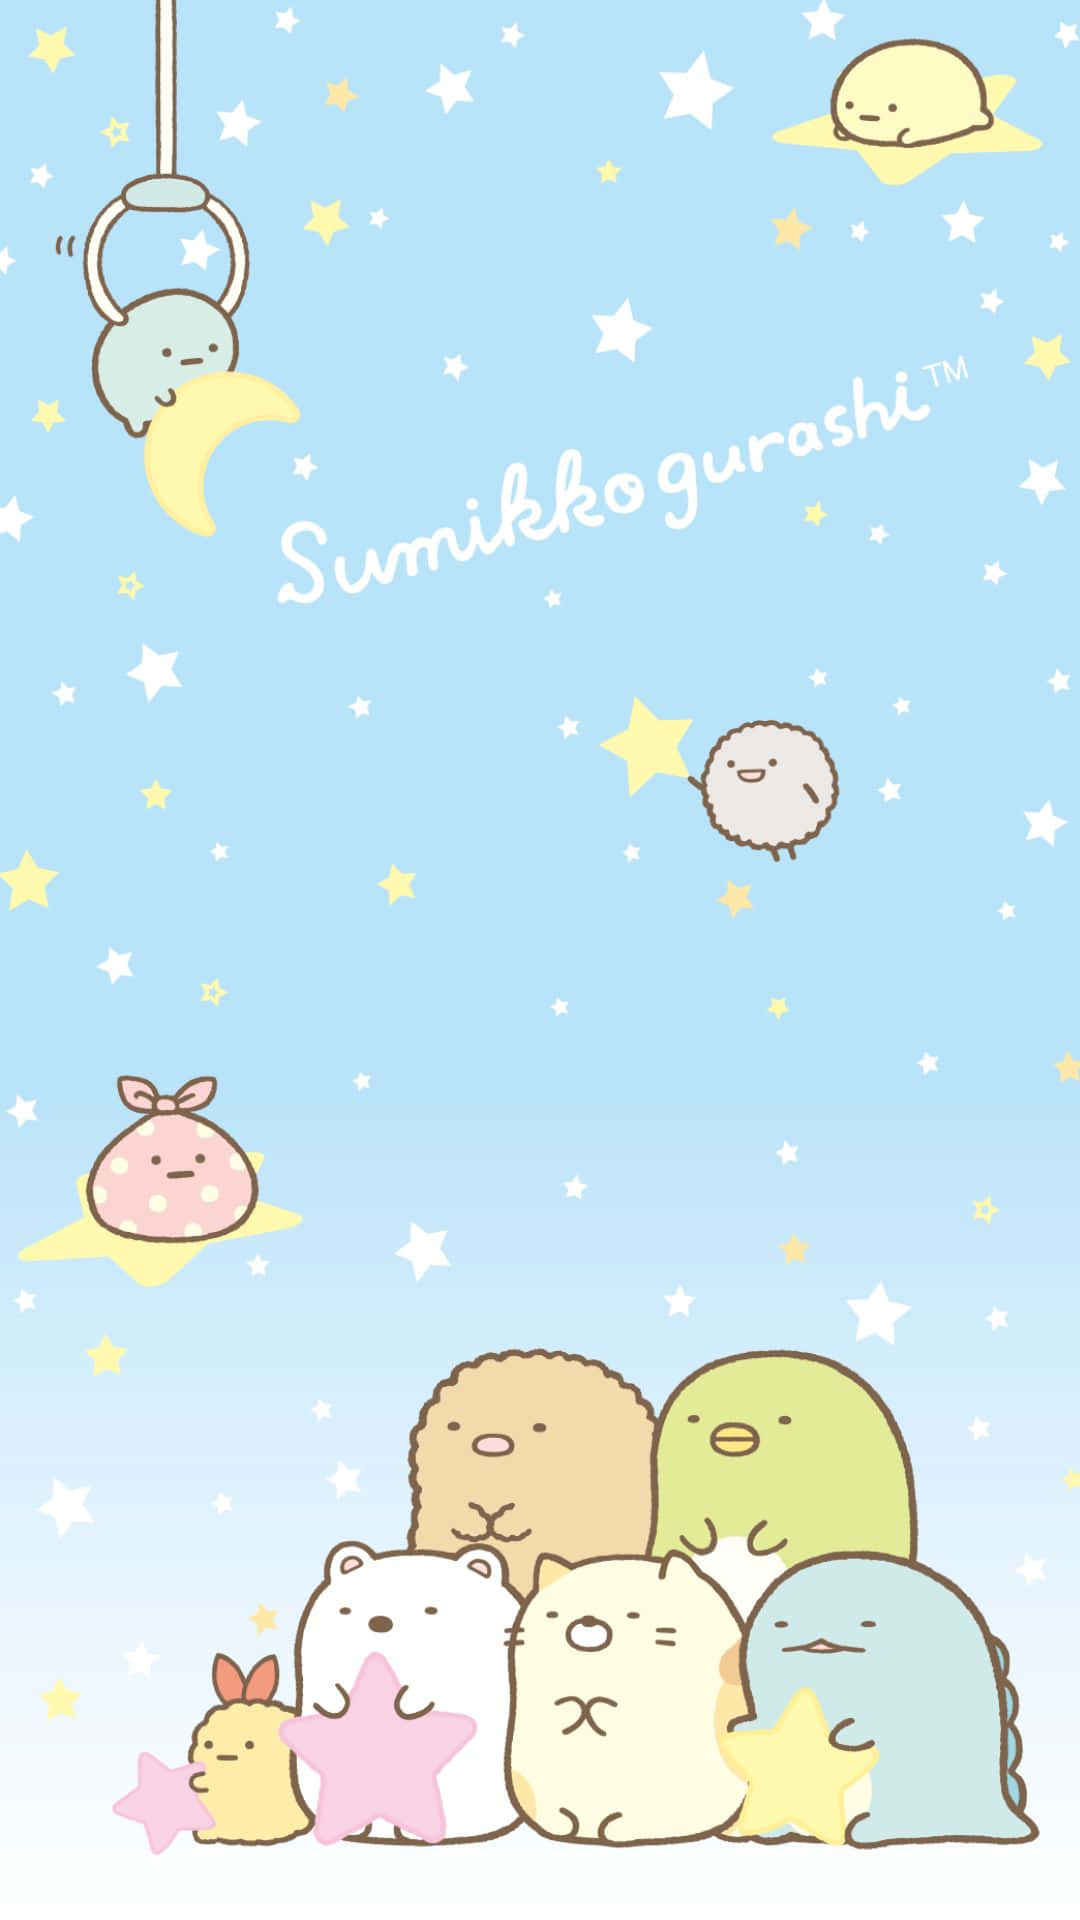 A group of adorable kawaii characters celebrating on a colorful background Wallpaper